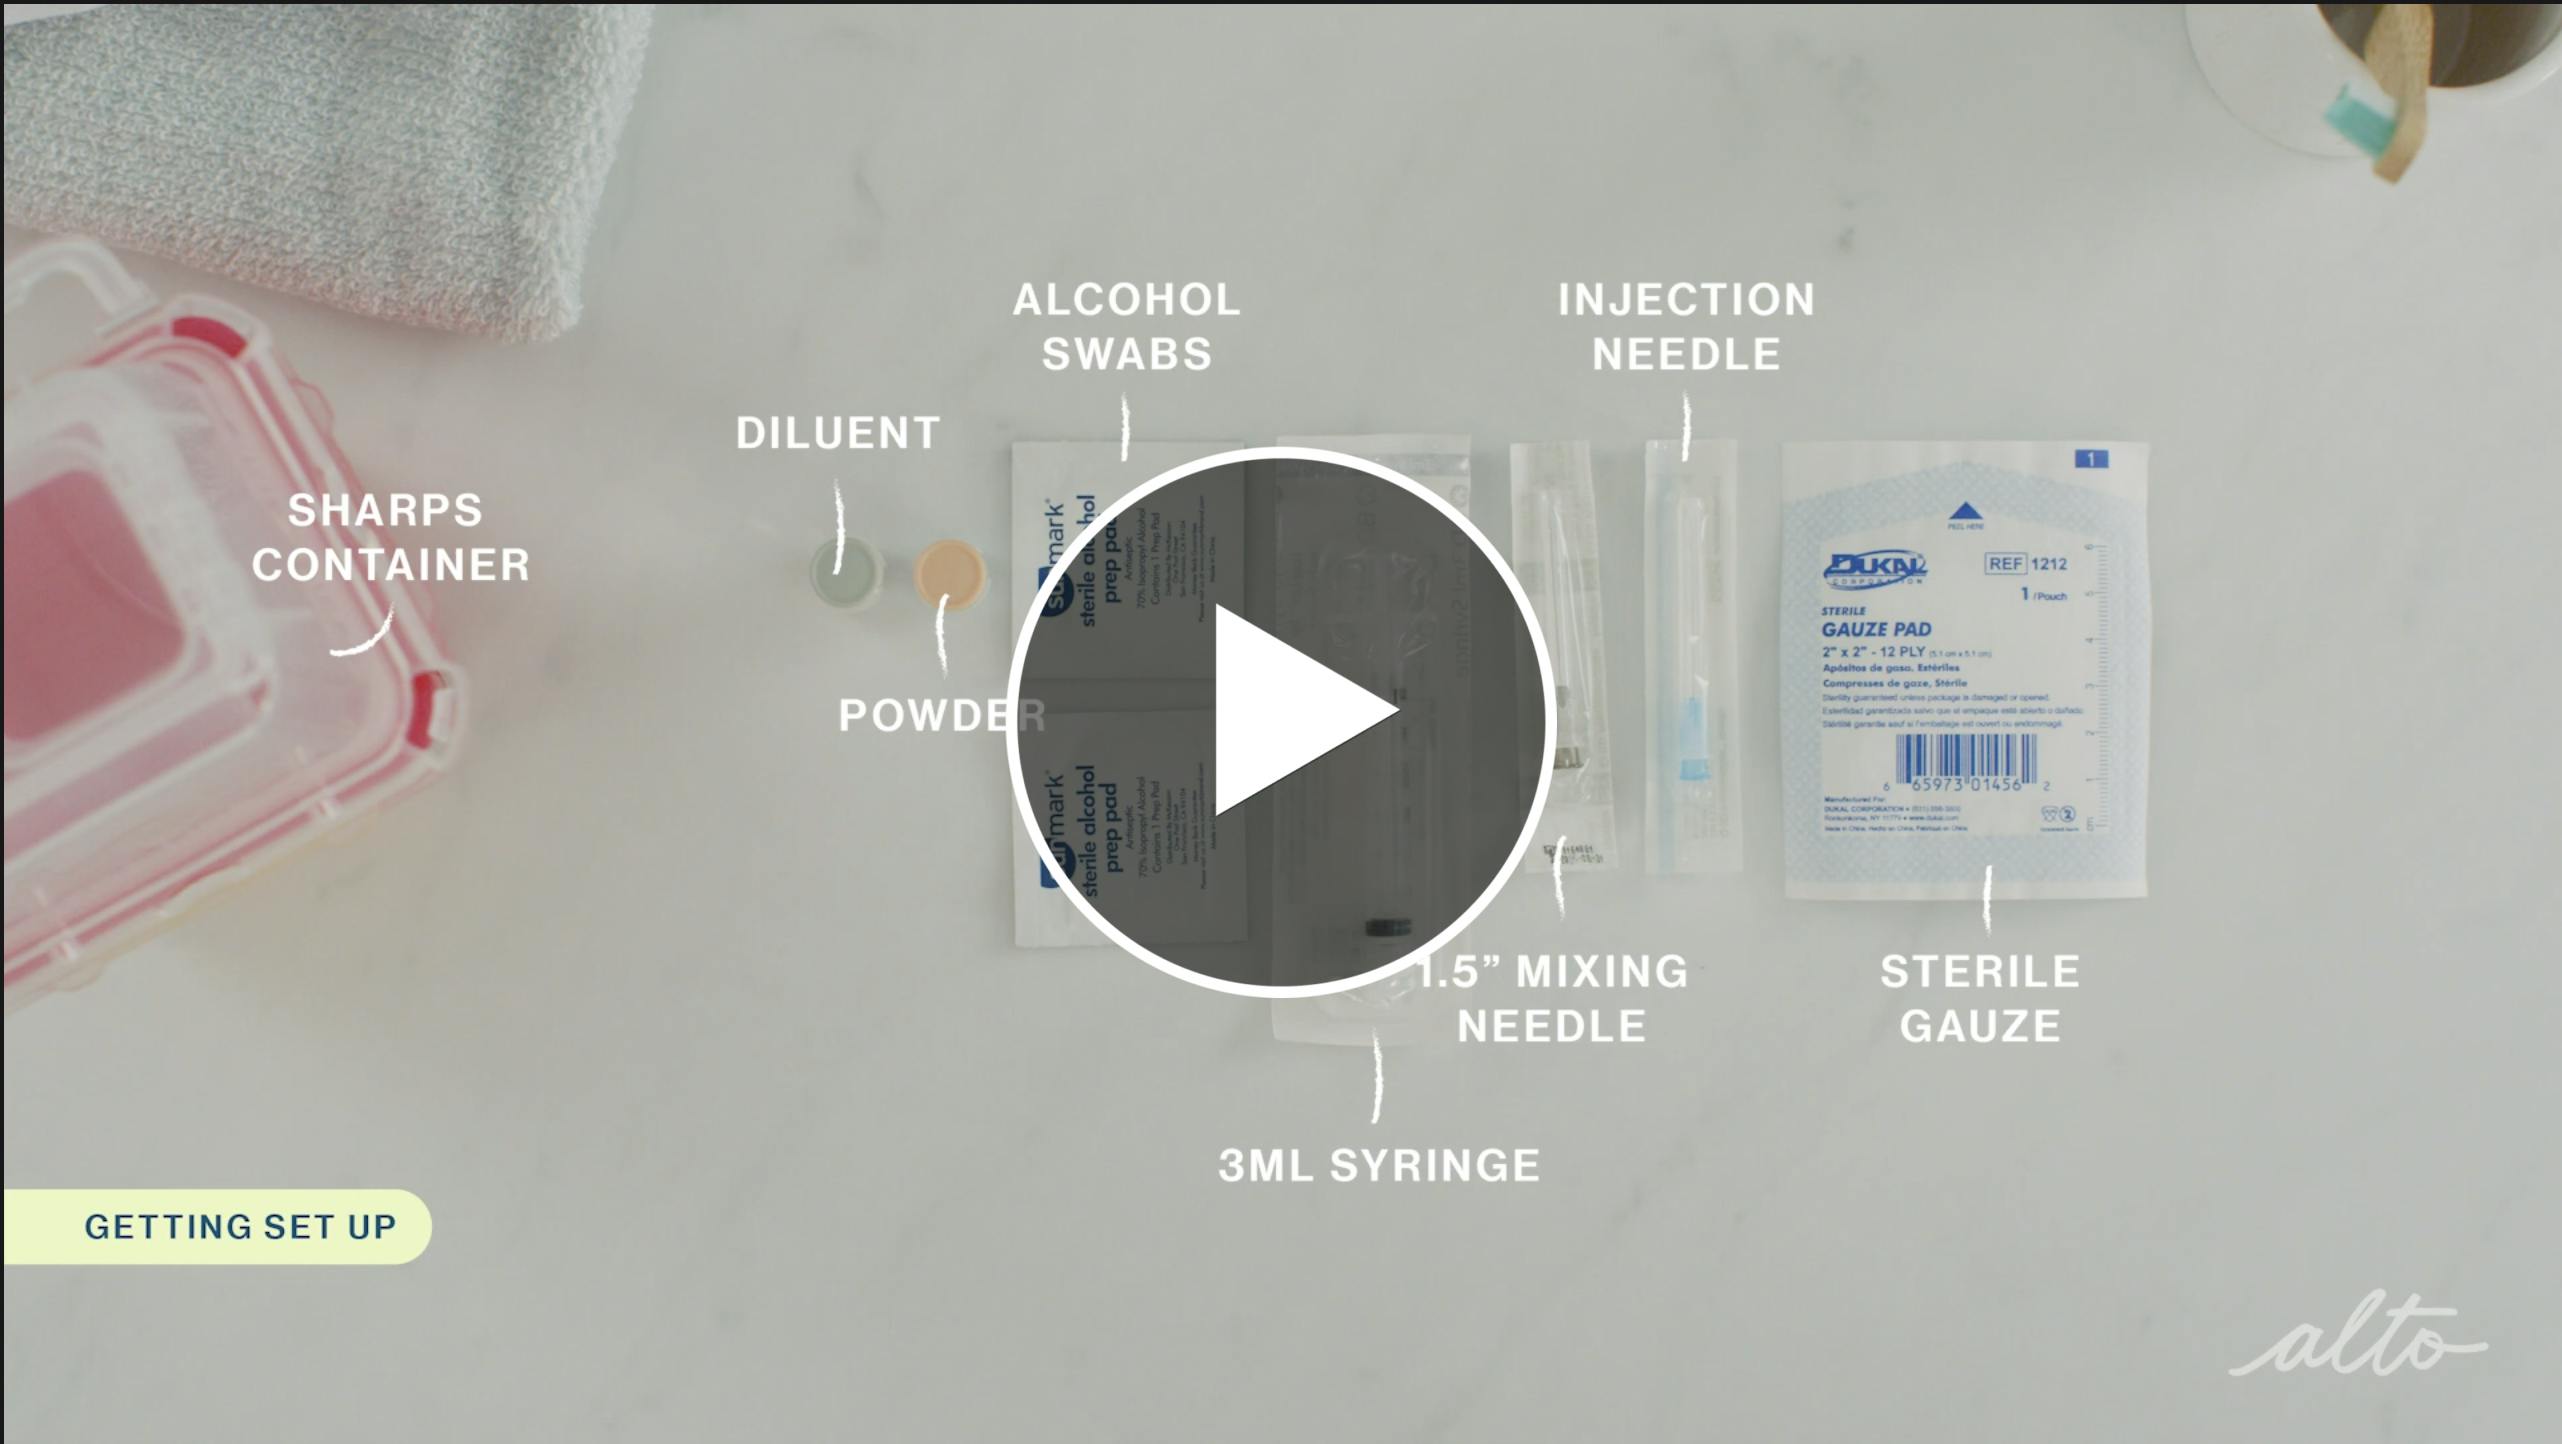 Menopur® with Mixing Needle + Intramuscular (IM) Injection video by Alto Pharmacy